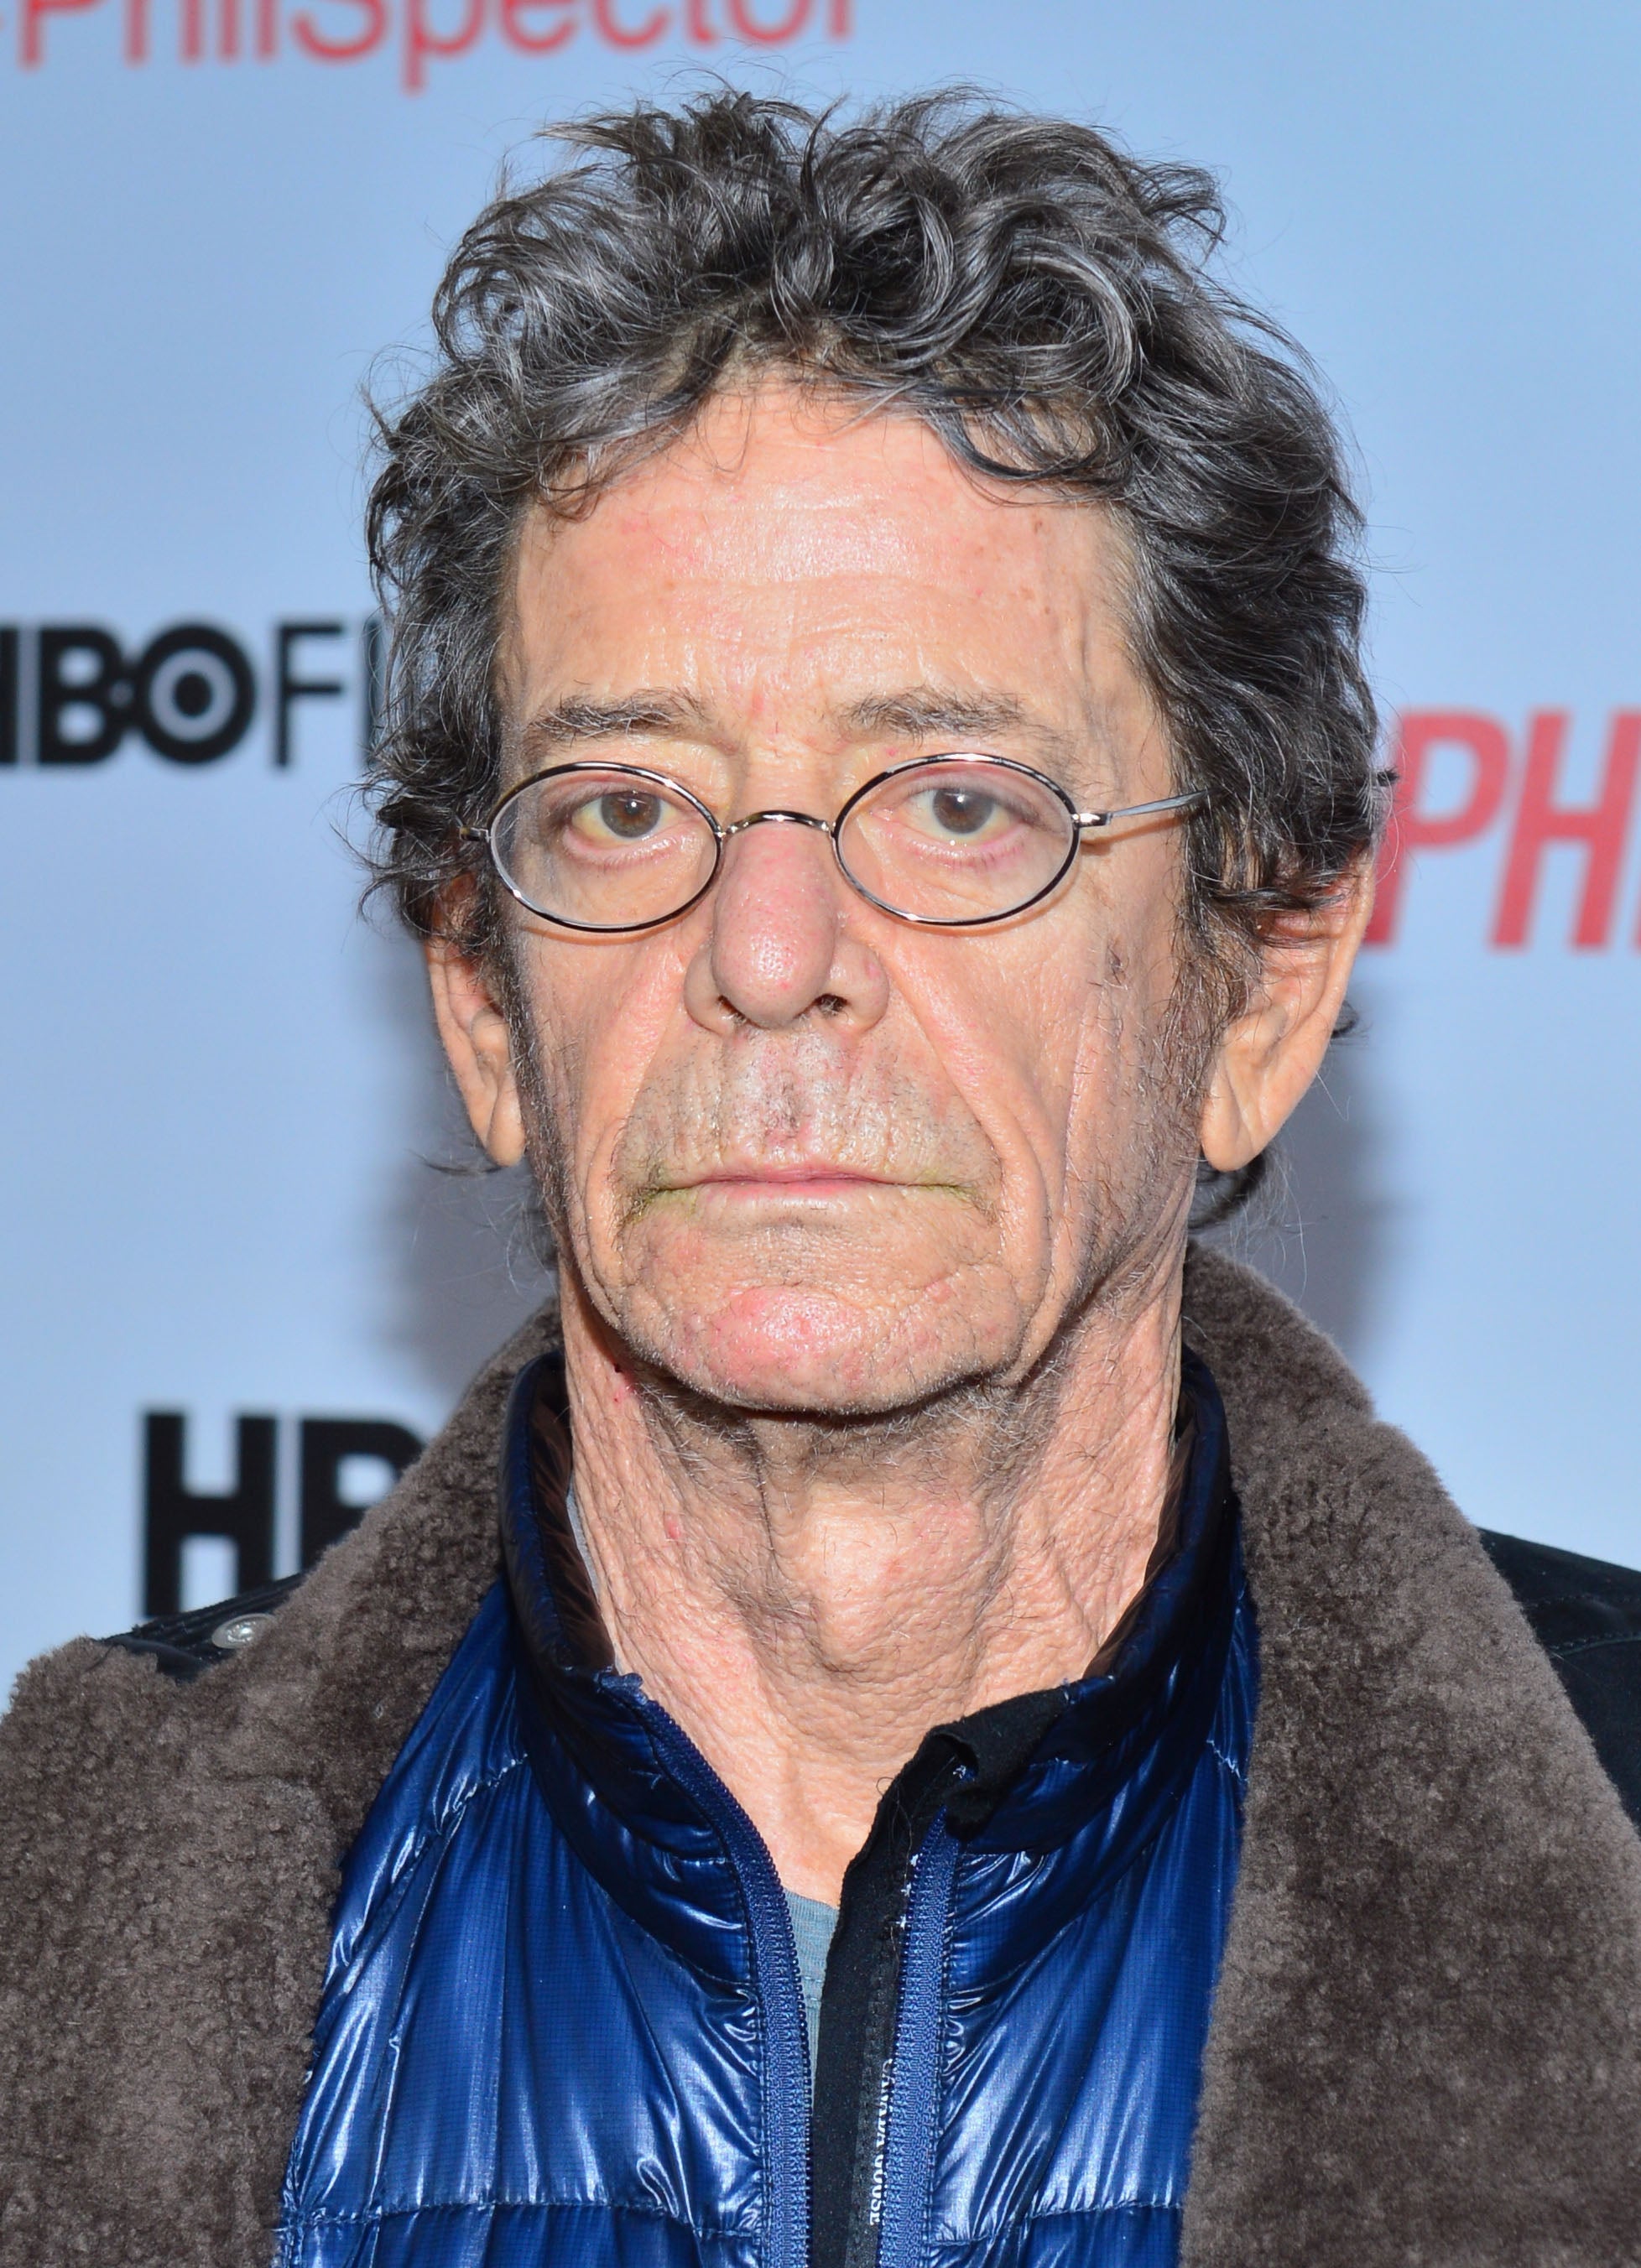 Musician Lou Reed is 'bigger and stronger' after a liver transplant